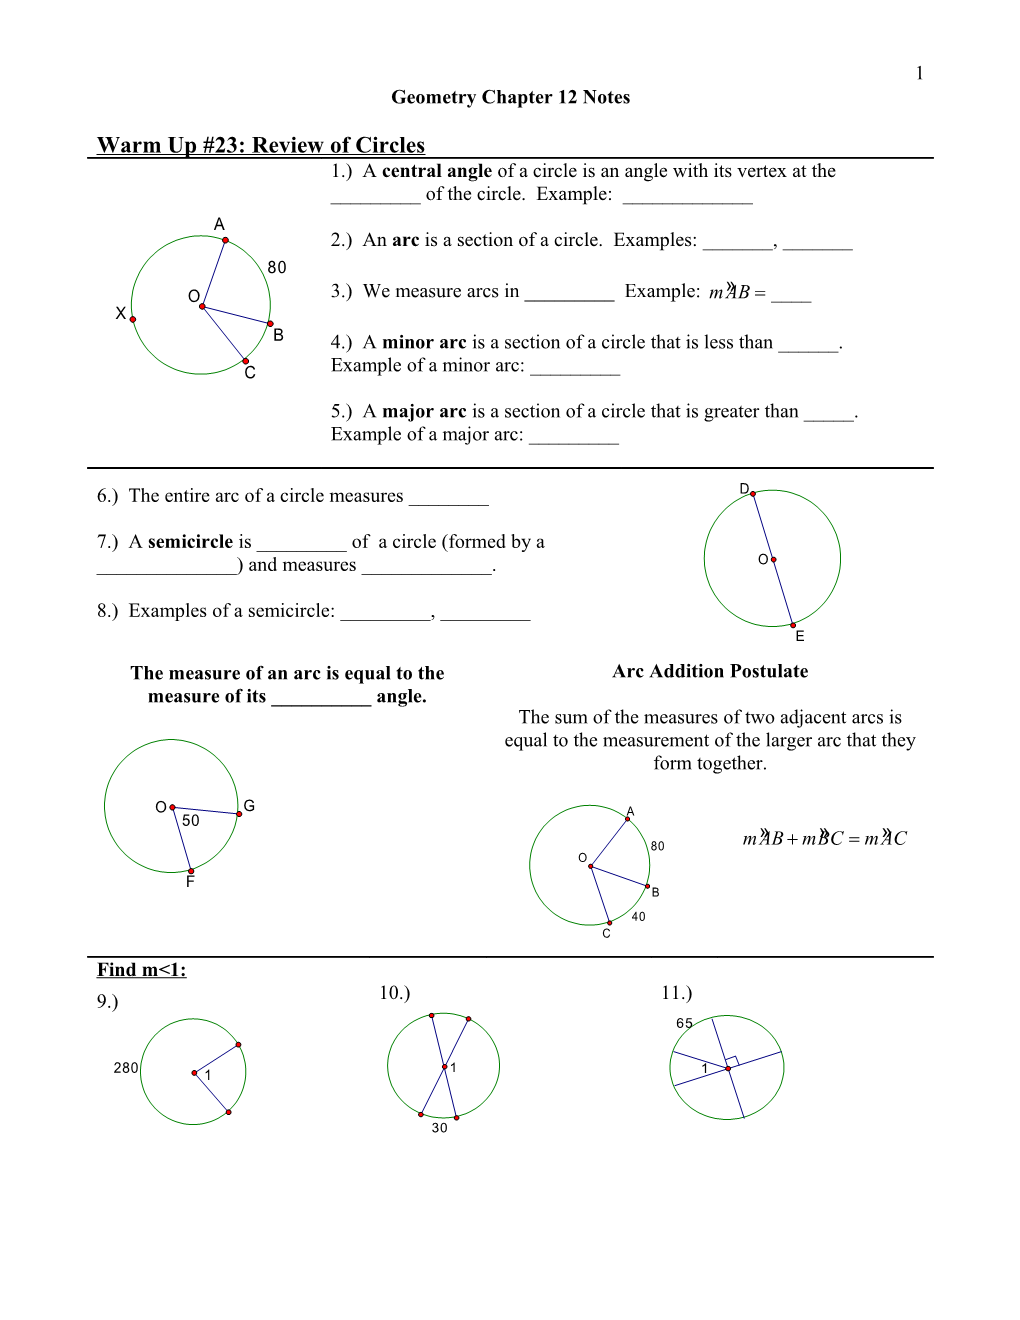 Geometry Chapter 12 Notes